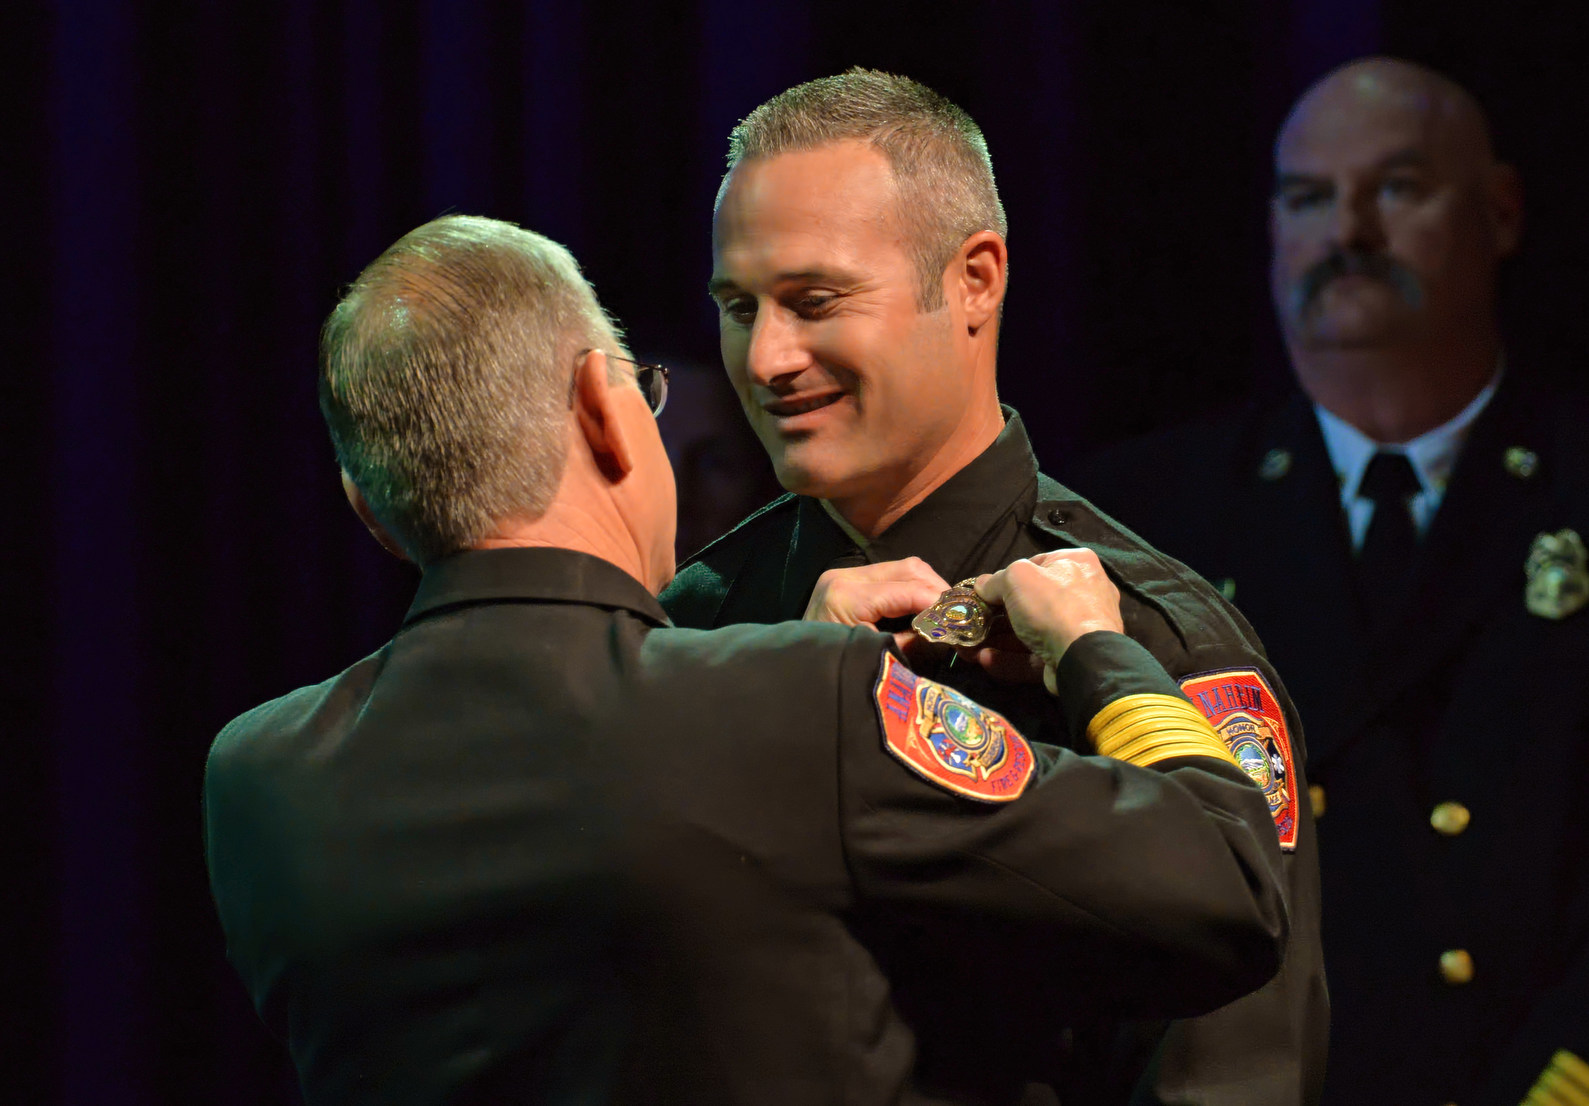 Fire Engineer Chris Fulkerson receives his new badge from Fire Chief Randy Bruegman during the Anaheim Fire & Rescue Promotion and Graduation ceremony. Photo by Steven Georges/Behind the Badge OC